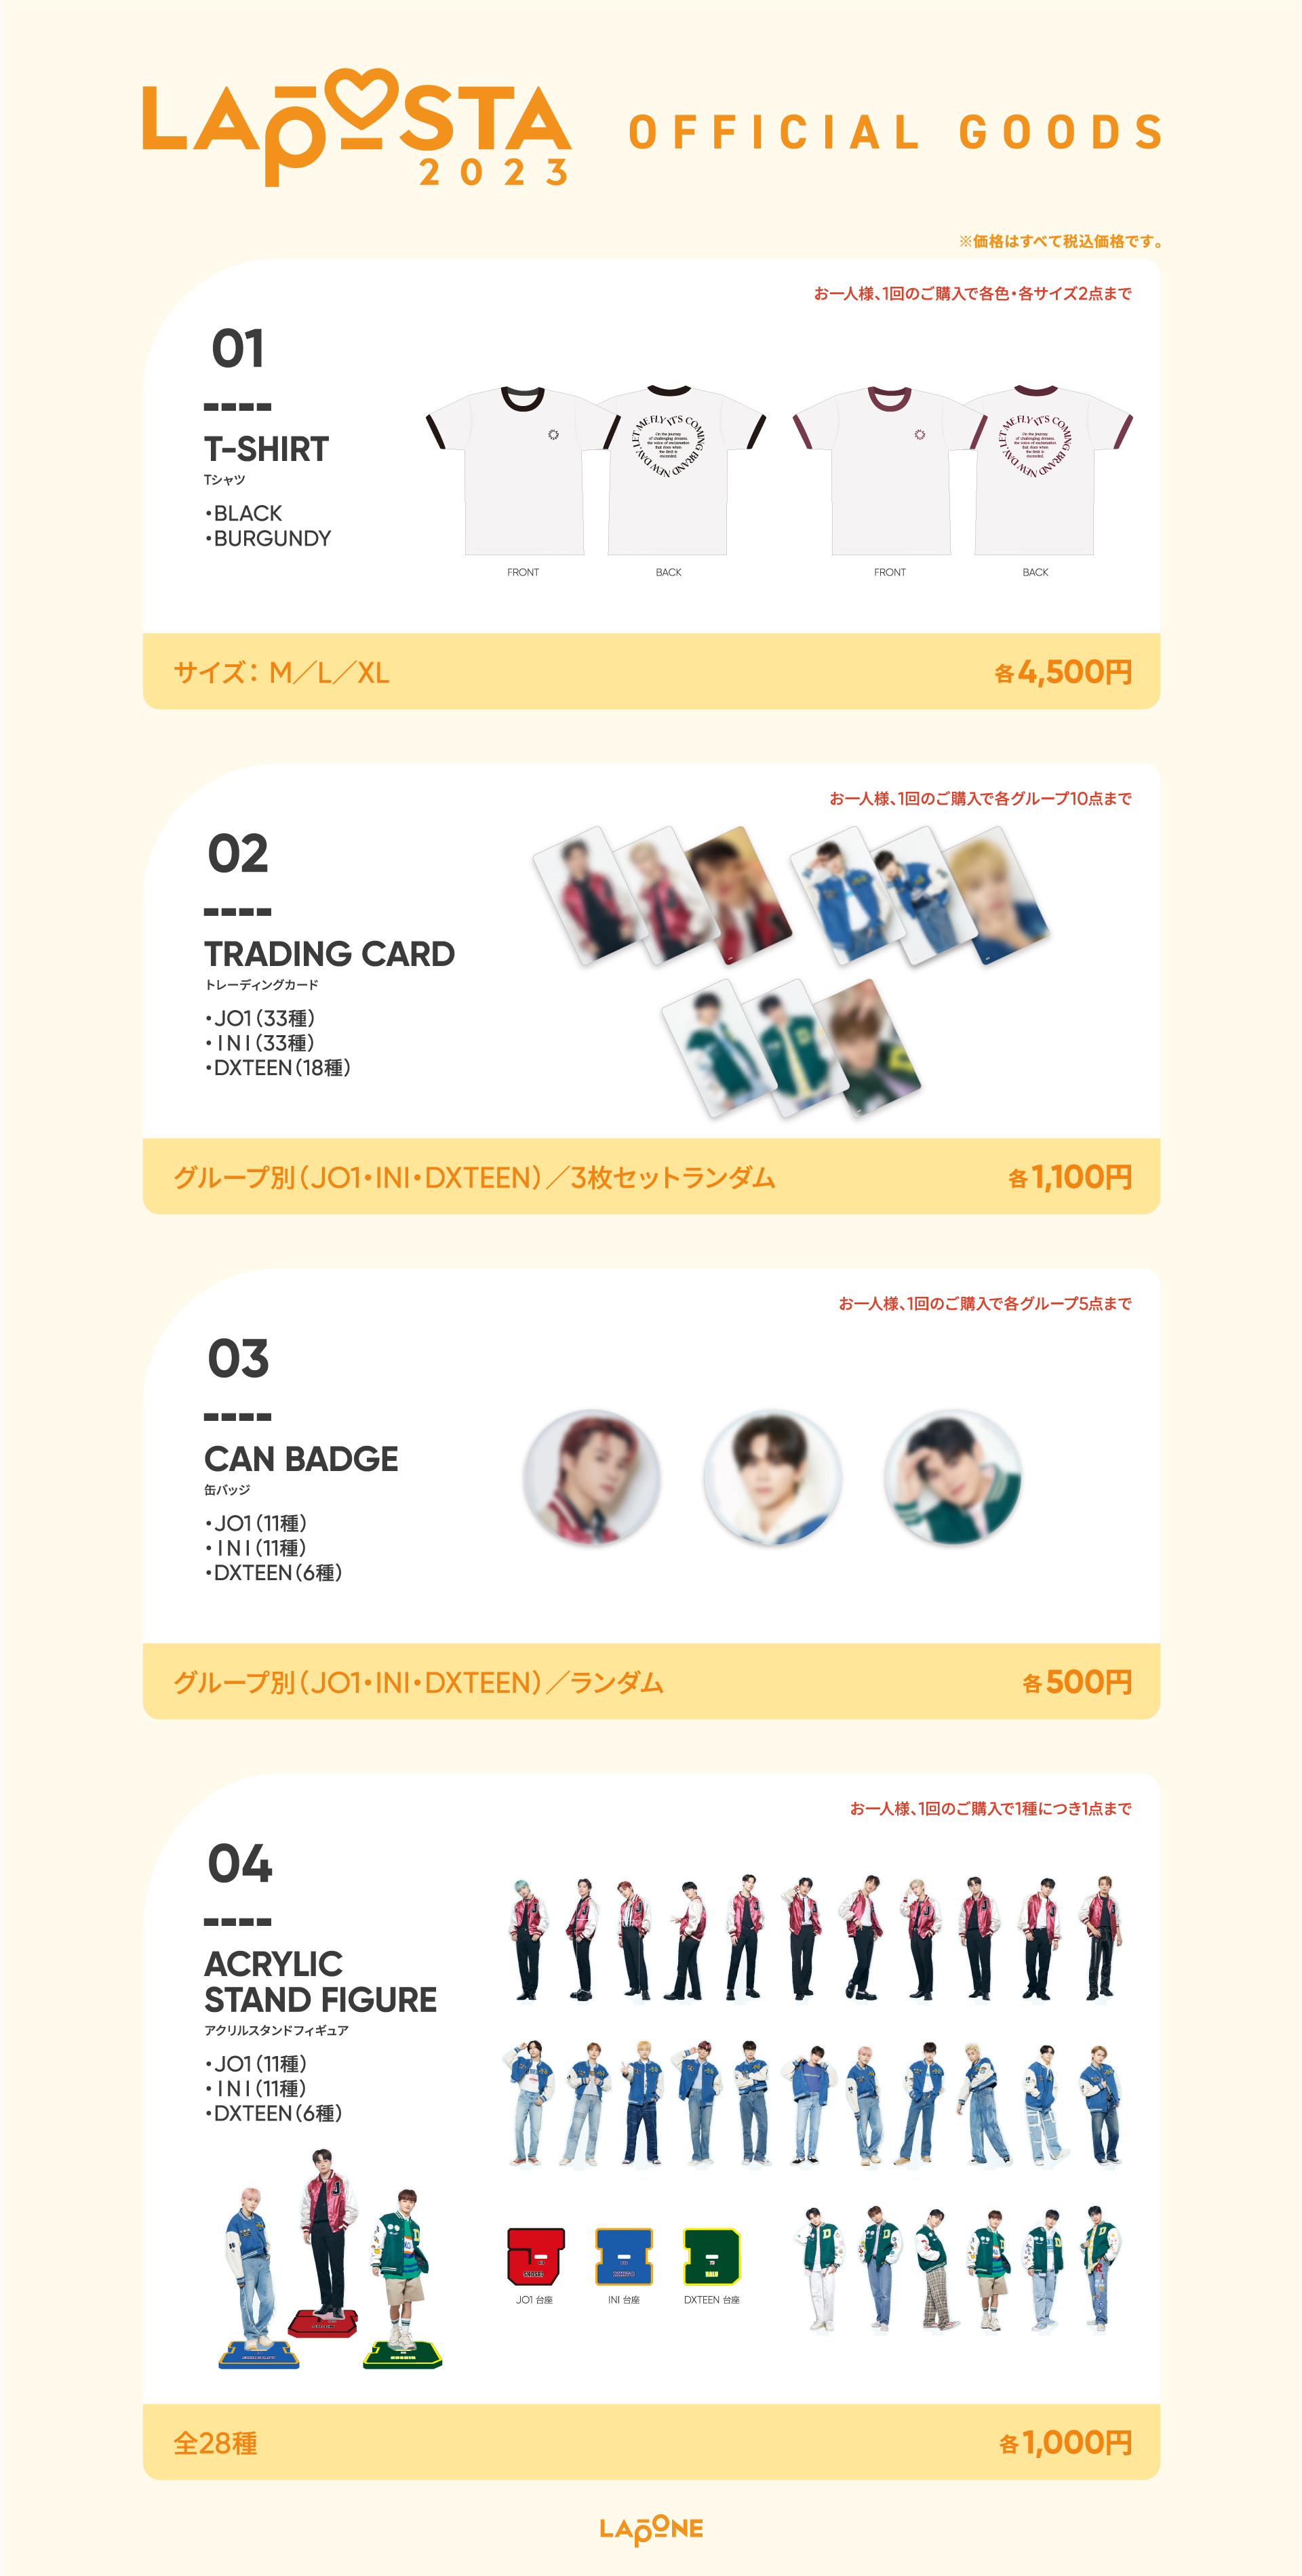 LAPOSTA2023」OFFICIAL GOODS LINEUP 公開！｜INI OFFICIAL SITE